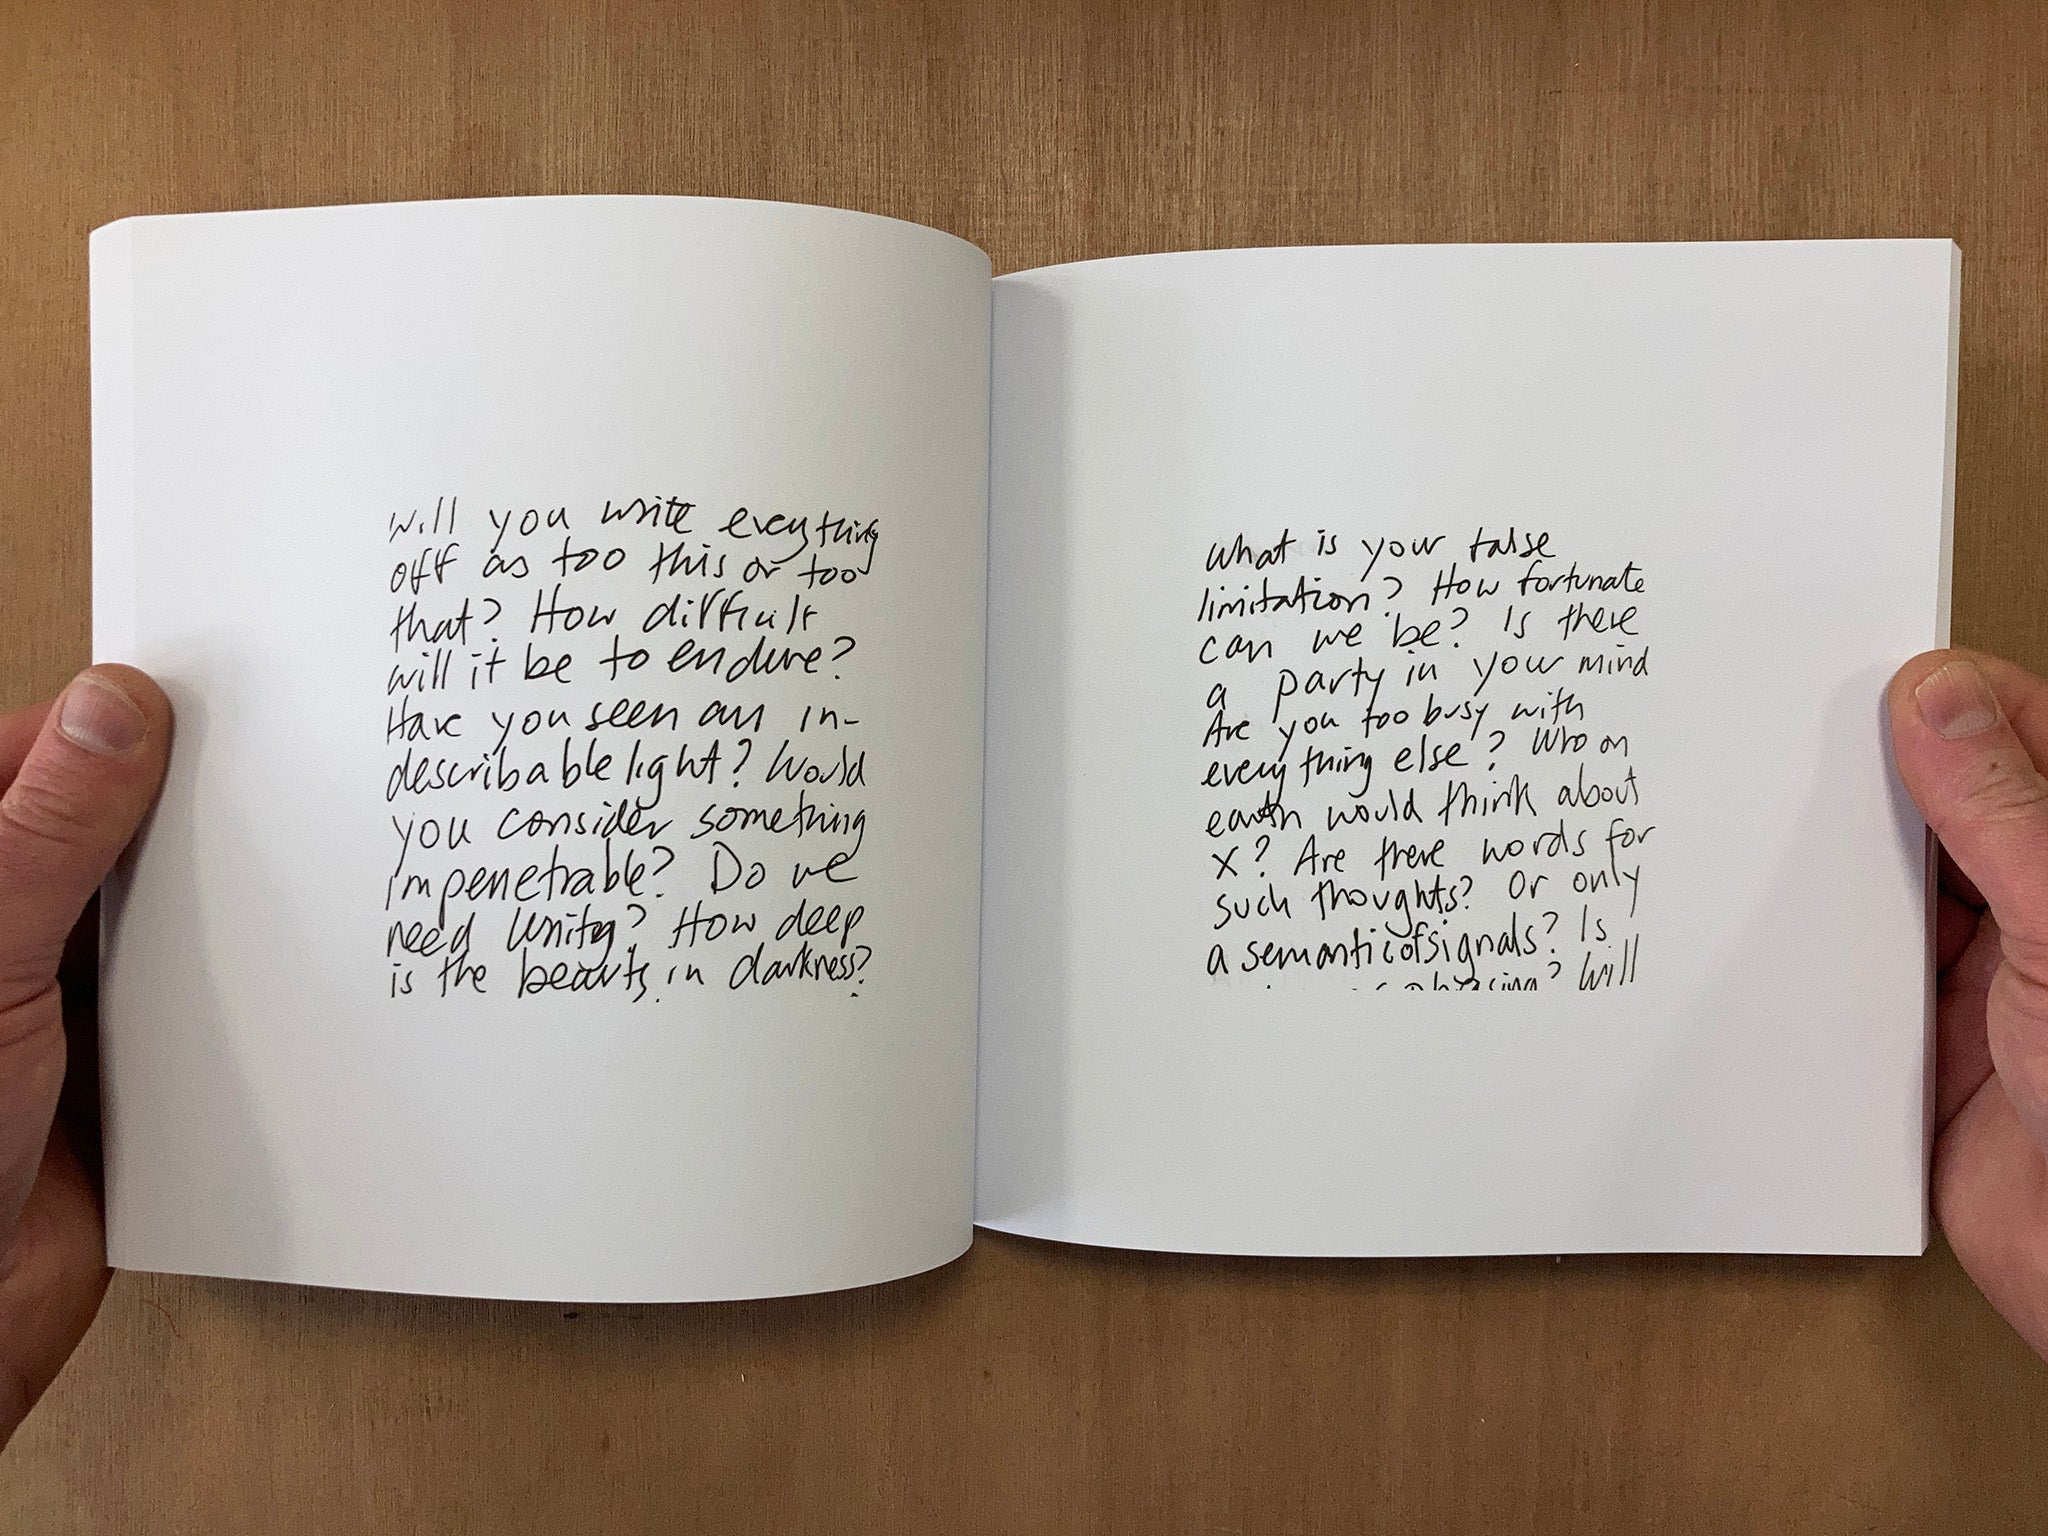 10,000 HAND-DRAWN QUESTIONS by Peter Jaeger